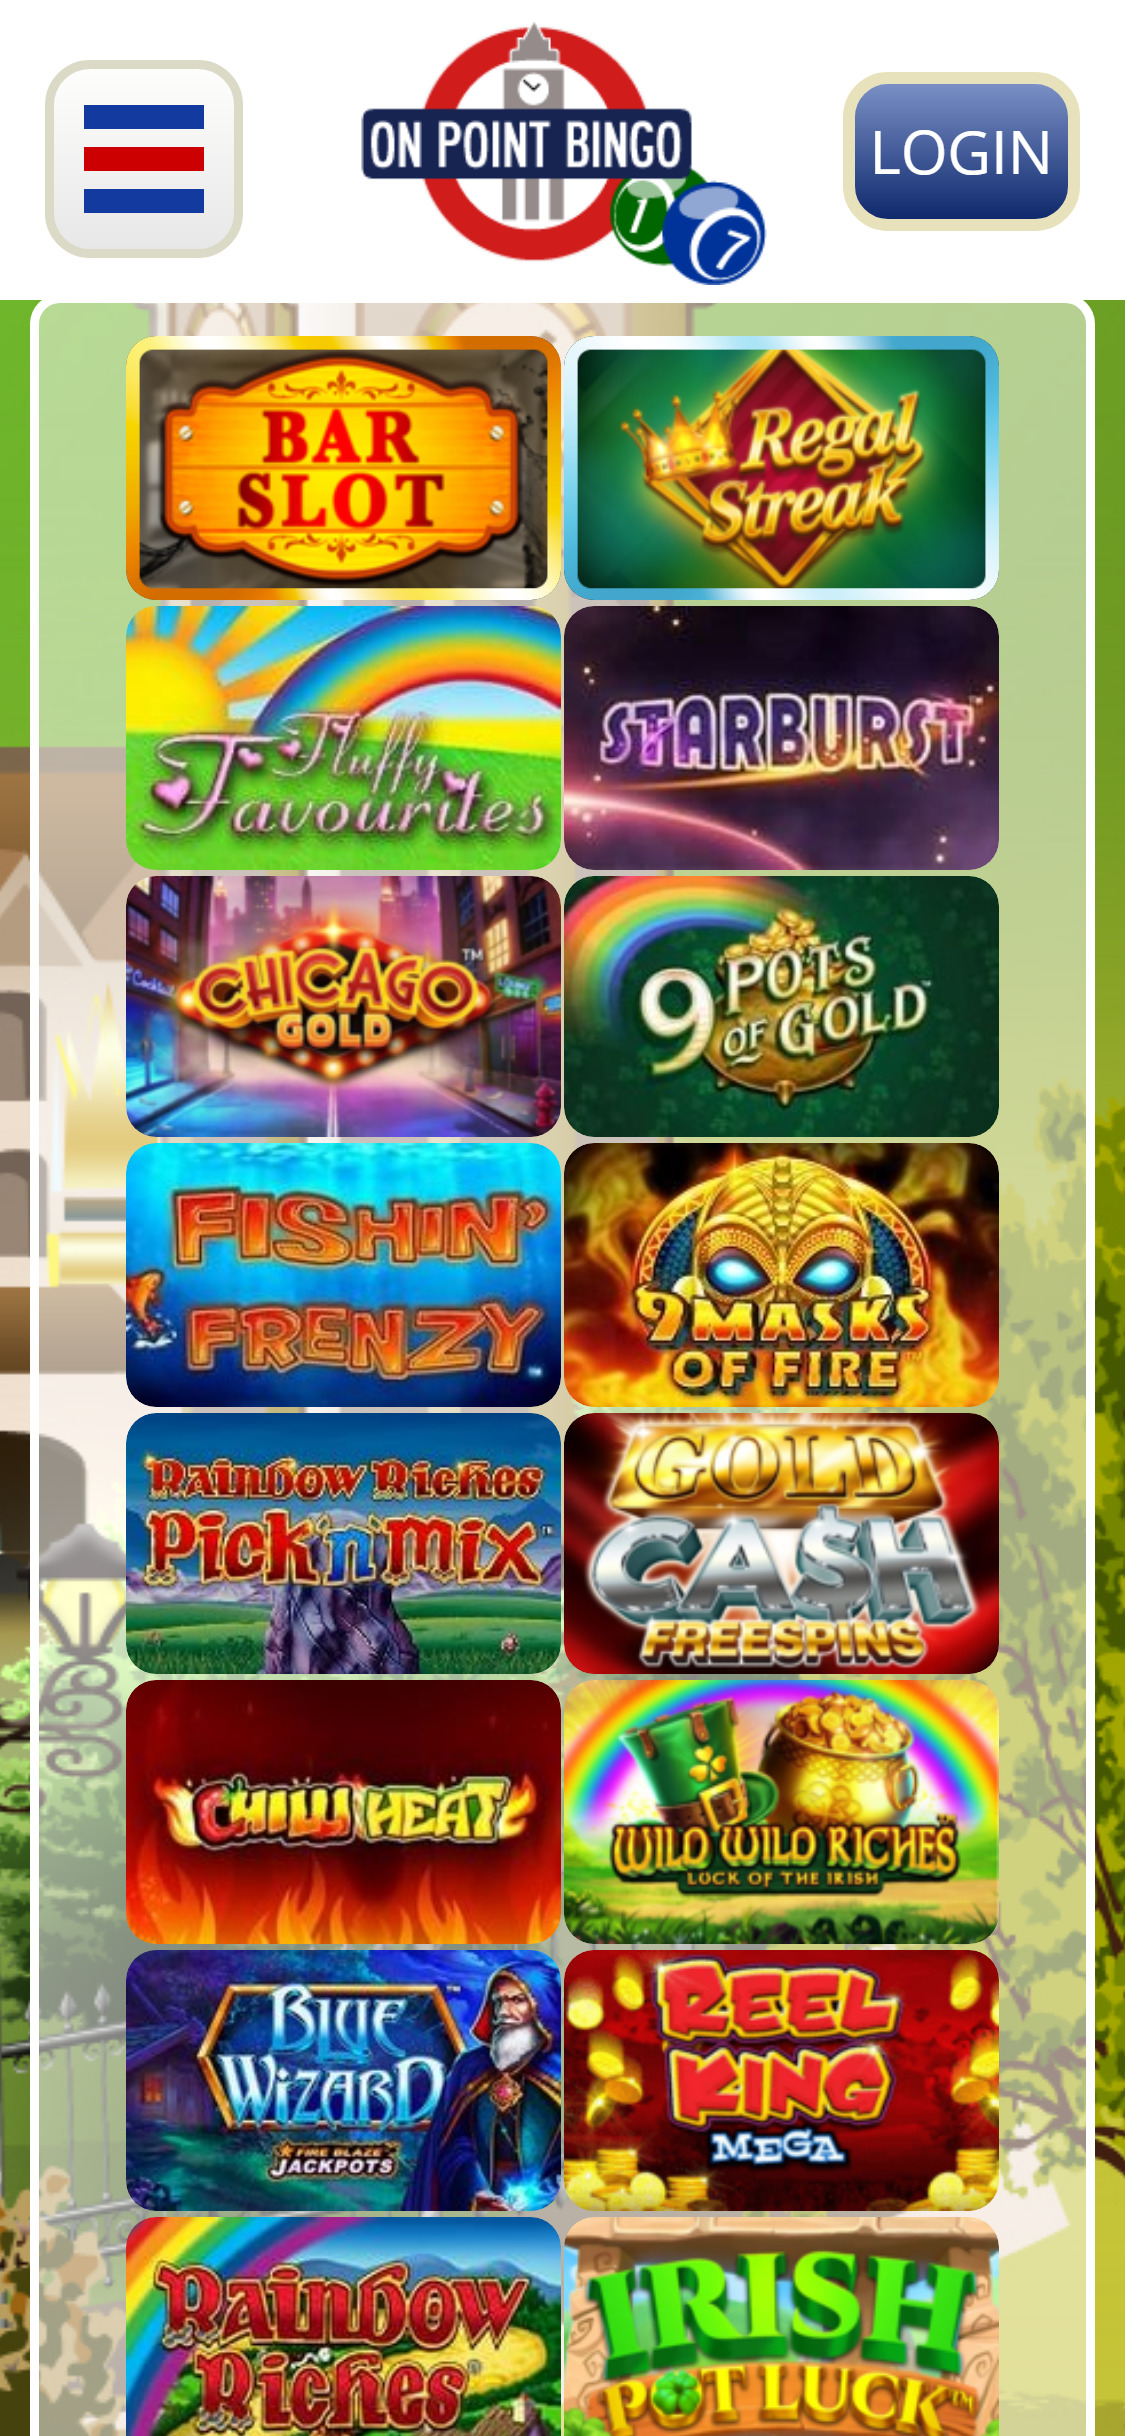 On Point Bingo Casino Mobile Games Review